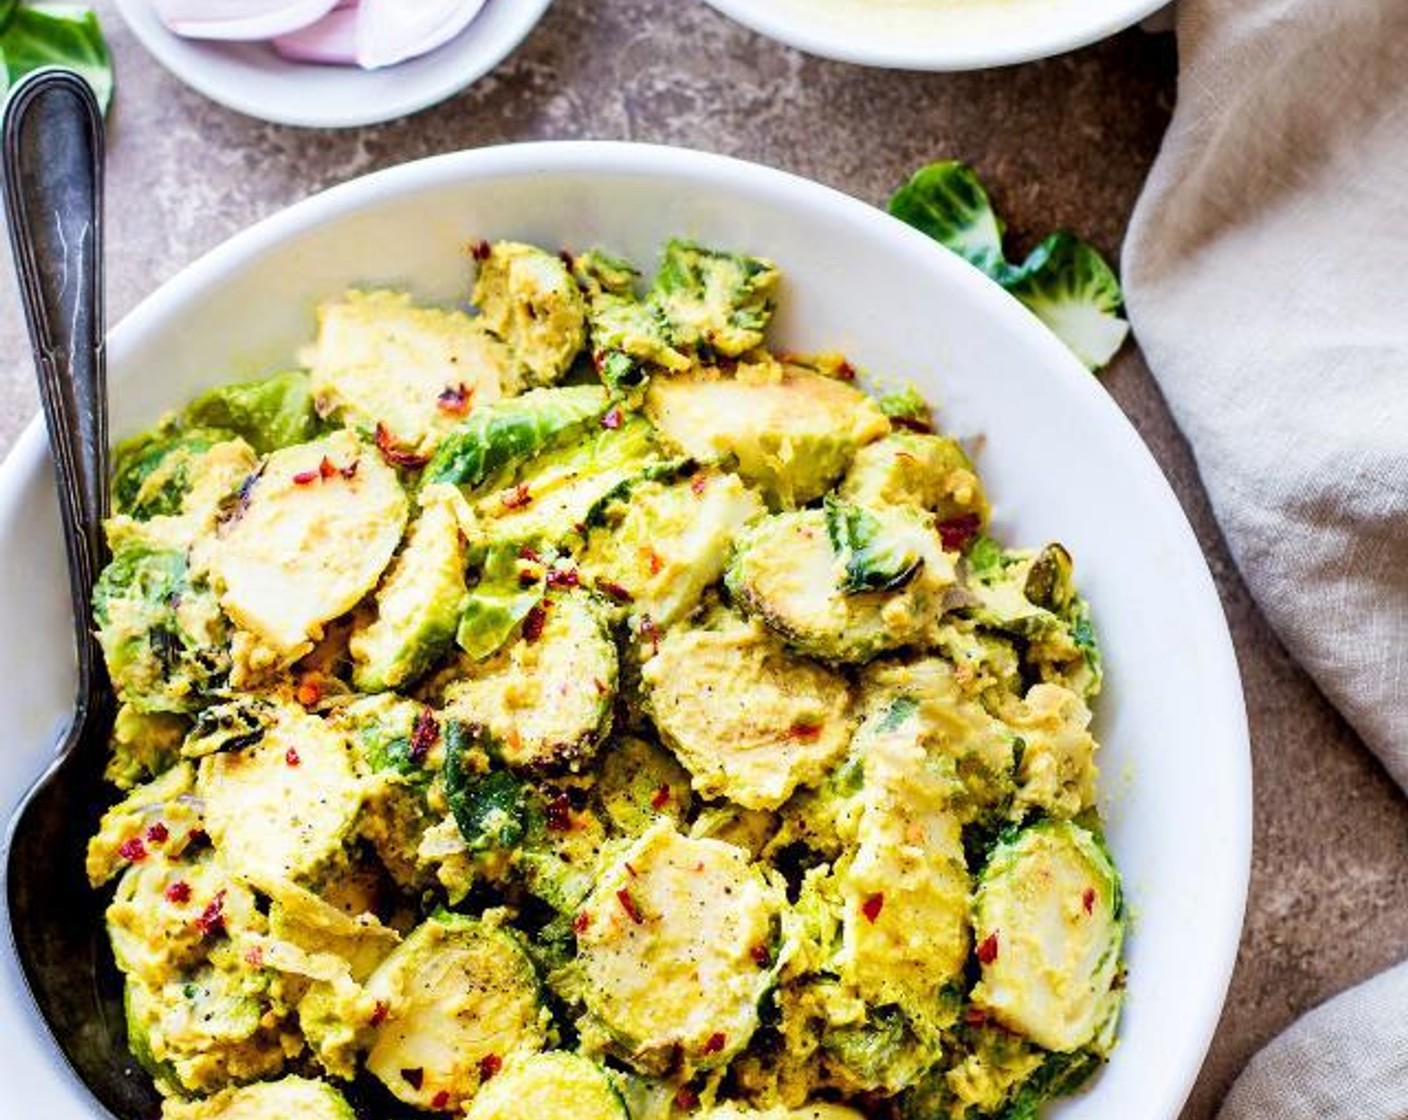 Creamy Mustard Brussels Sprouts Salad